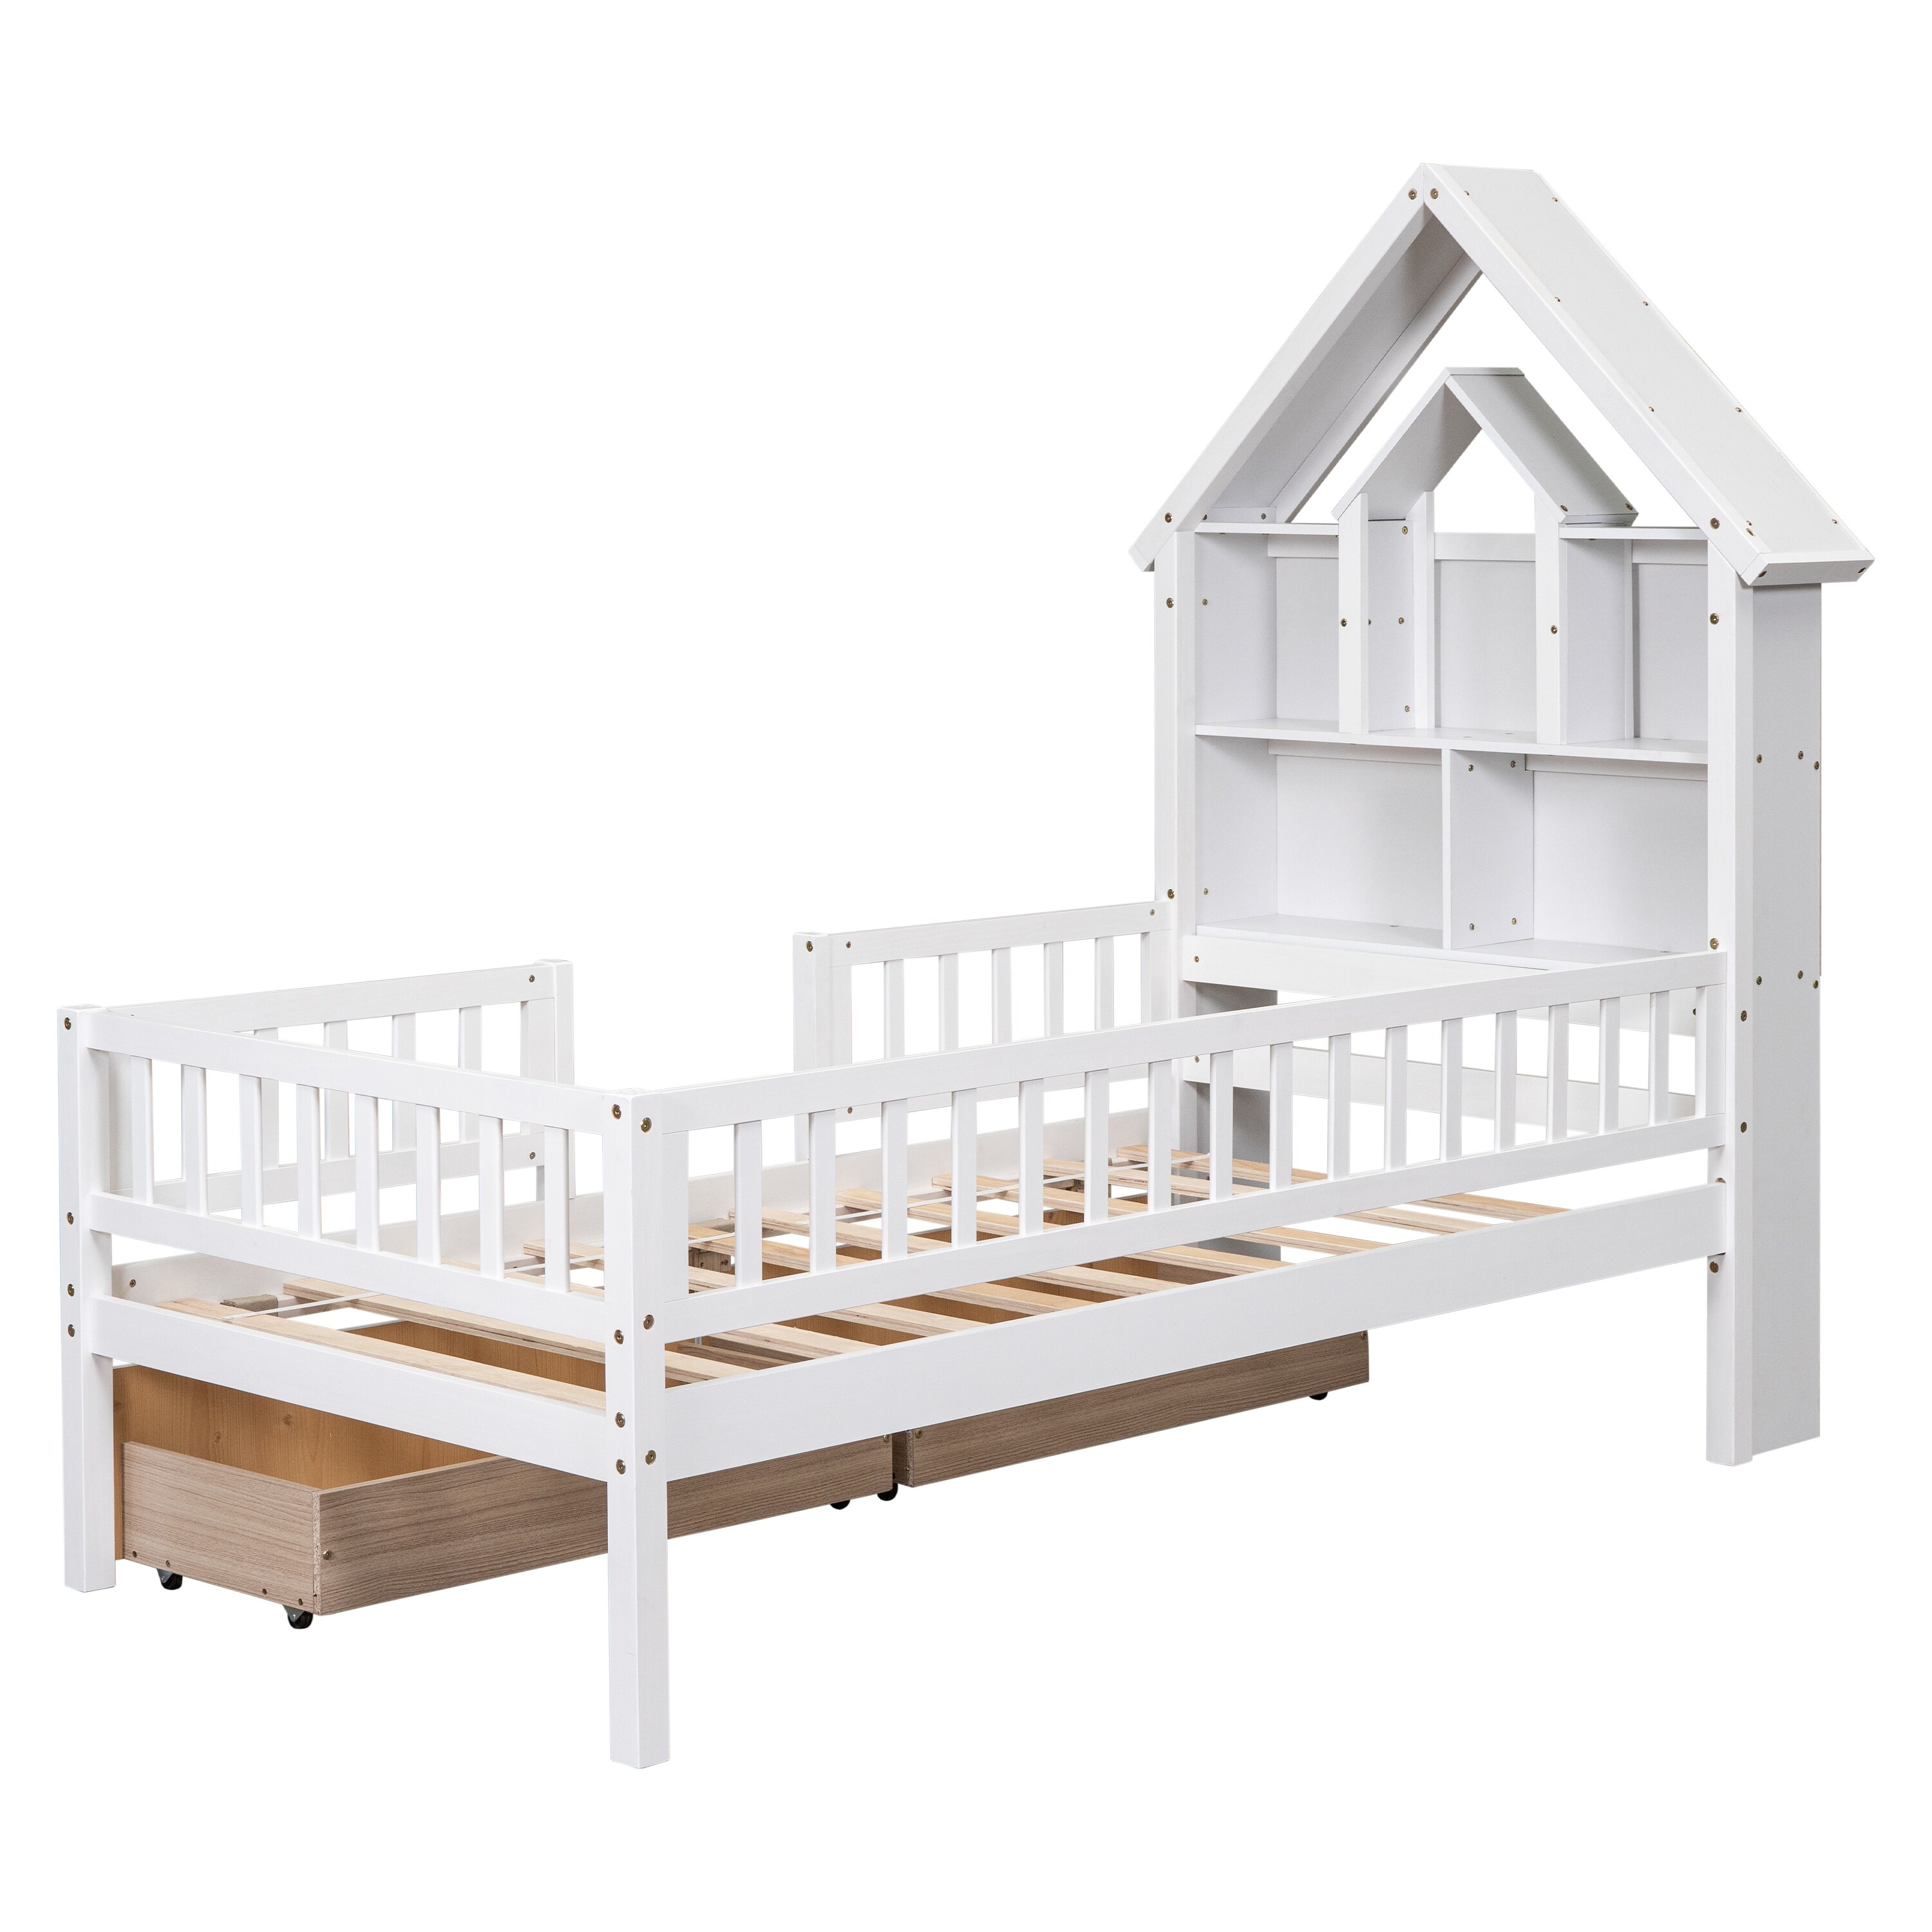 House-Shaped Pine Twin Size Bed with Drawers